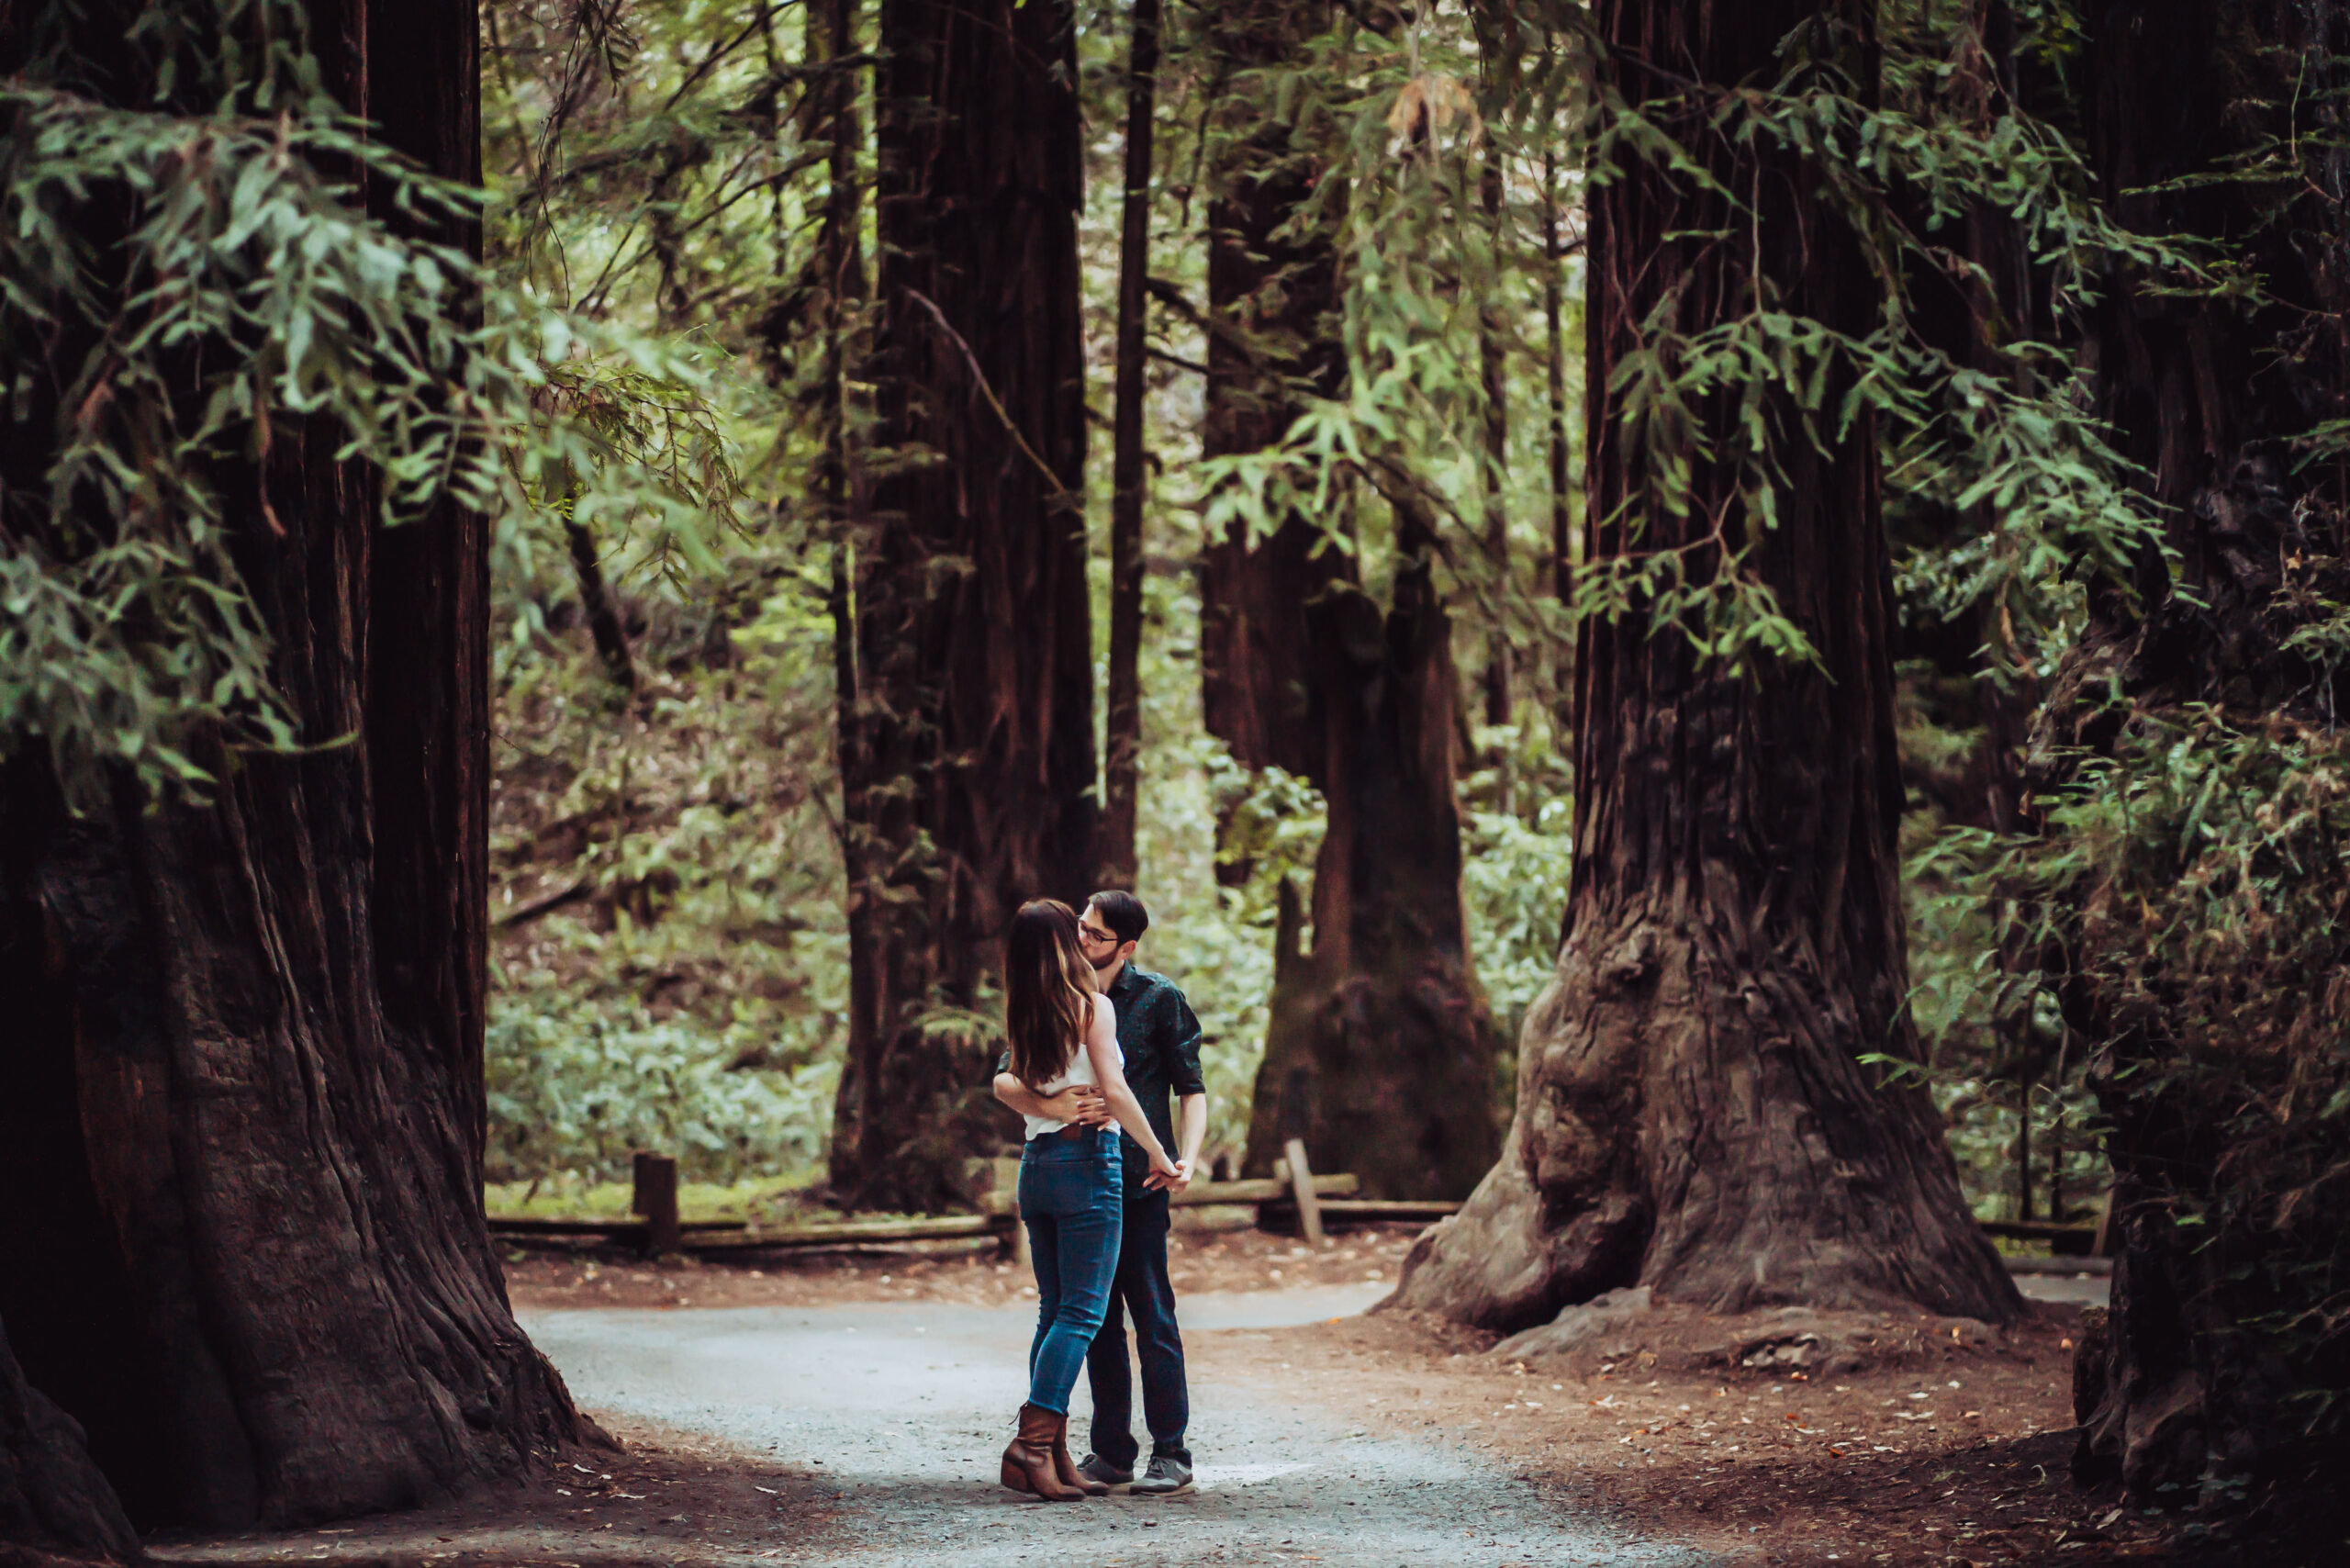 a couple walking in the giant redwoods in Northern California for thier mini moon